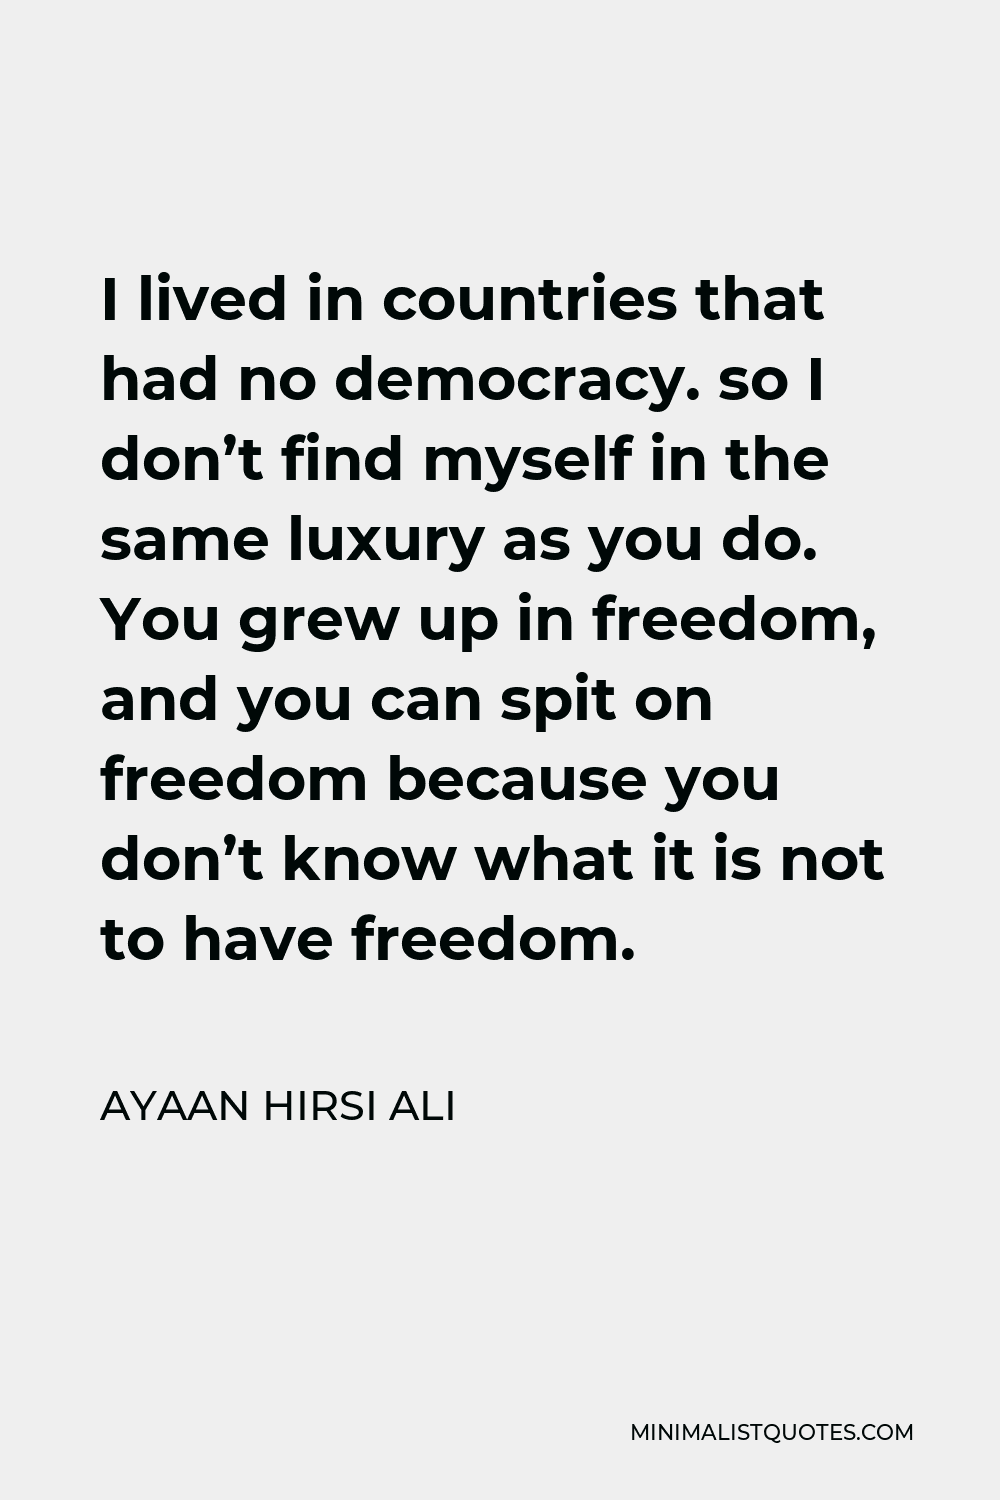 Ayaan Hirsi Ali Quote - I lived in countries that had no democracy. so I don’t find myself in the same luxury as you do. You grew up in freedom, and you can spit on freedom because you don’t know what it is not to have freedom.